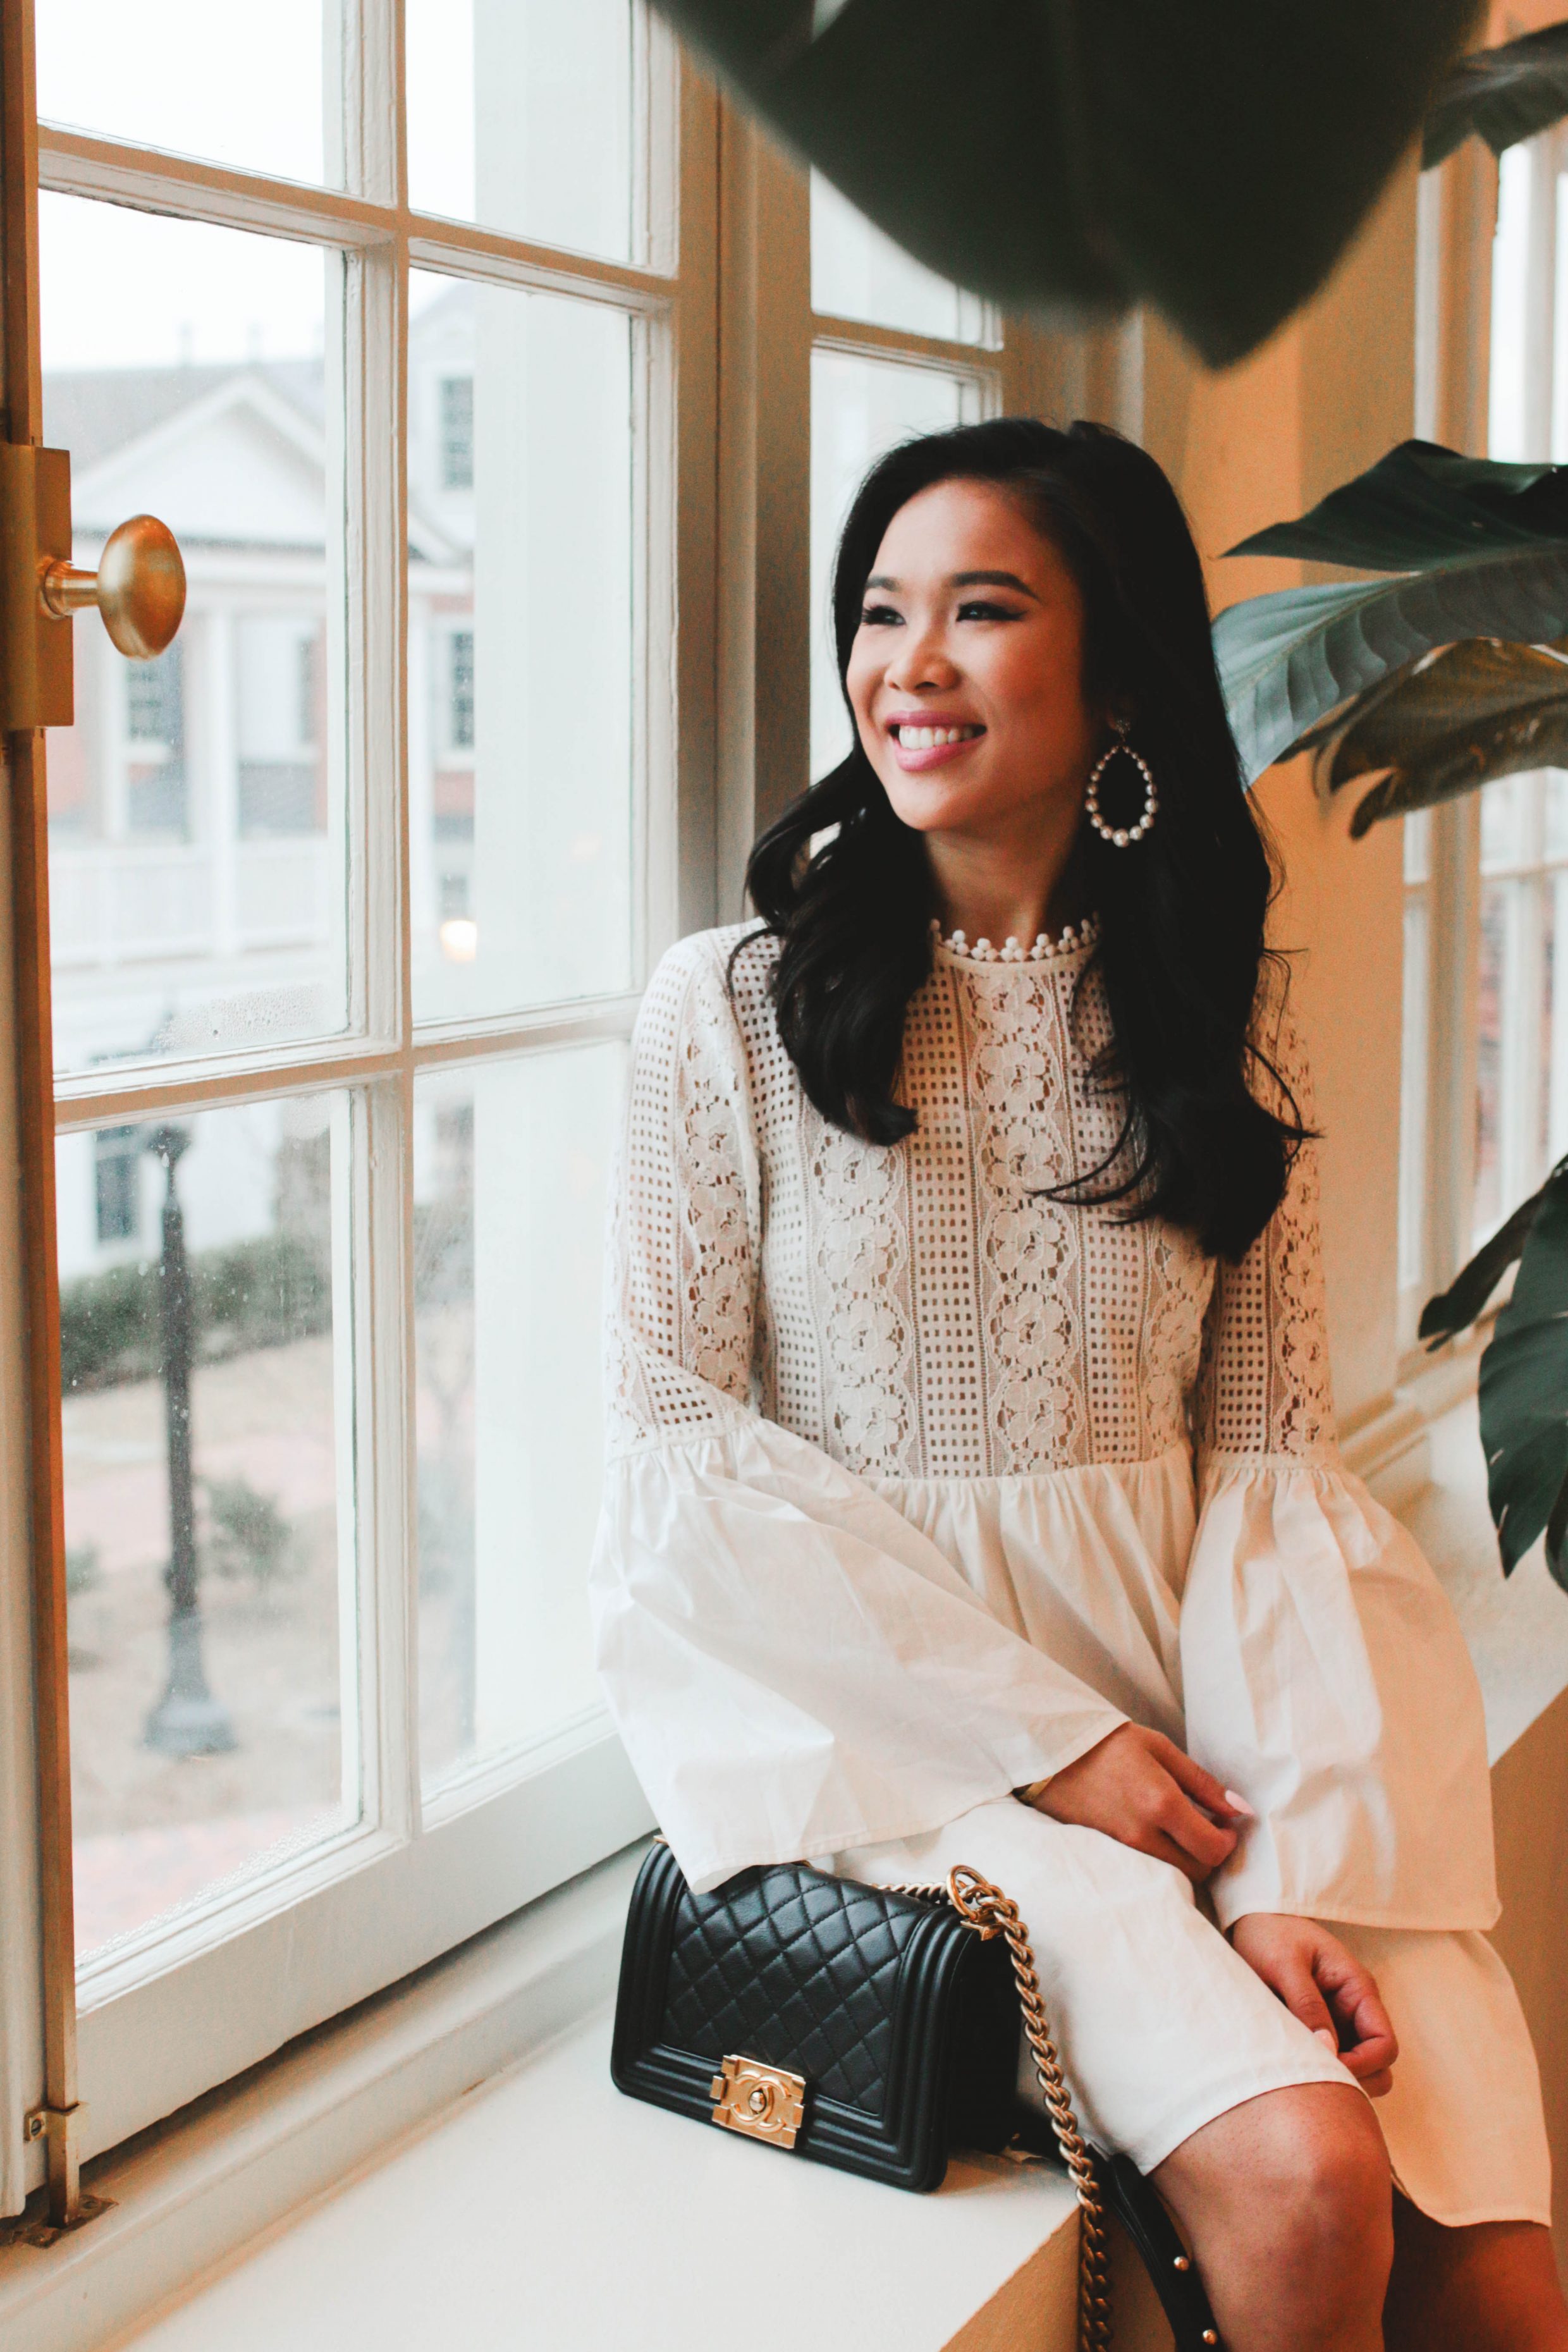 Hoang-Kim wears a white lace dress with olive + piper pearl hoop earrings at The Cavalier Hotel in Virginia beach